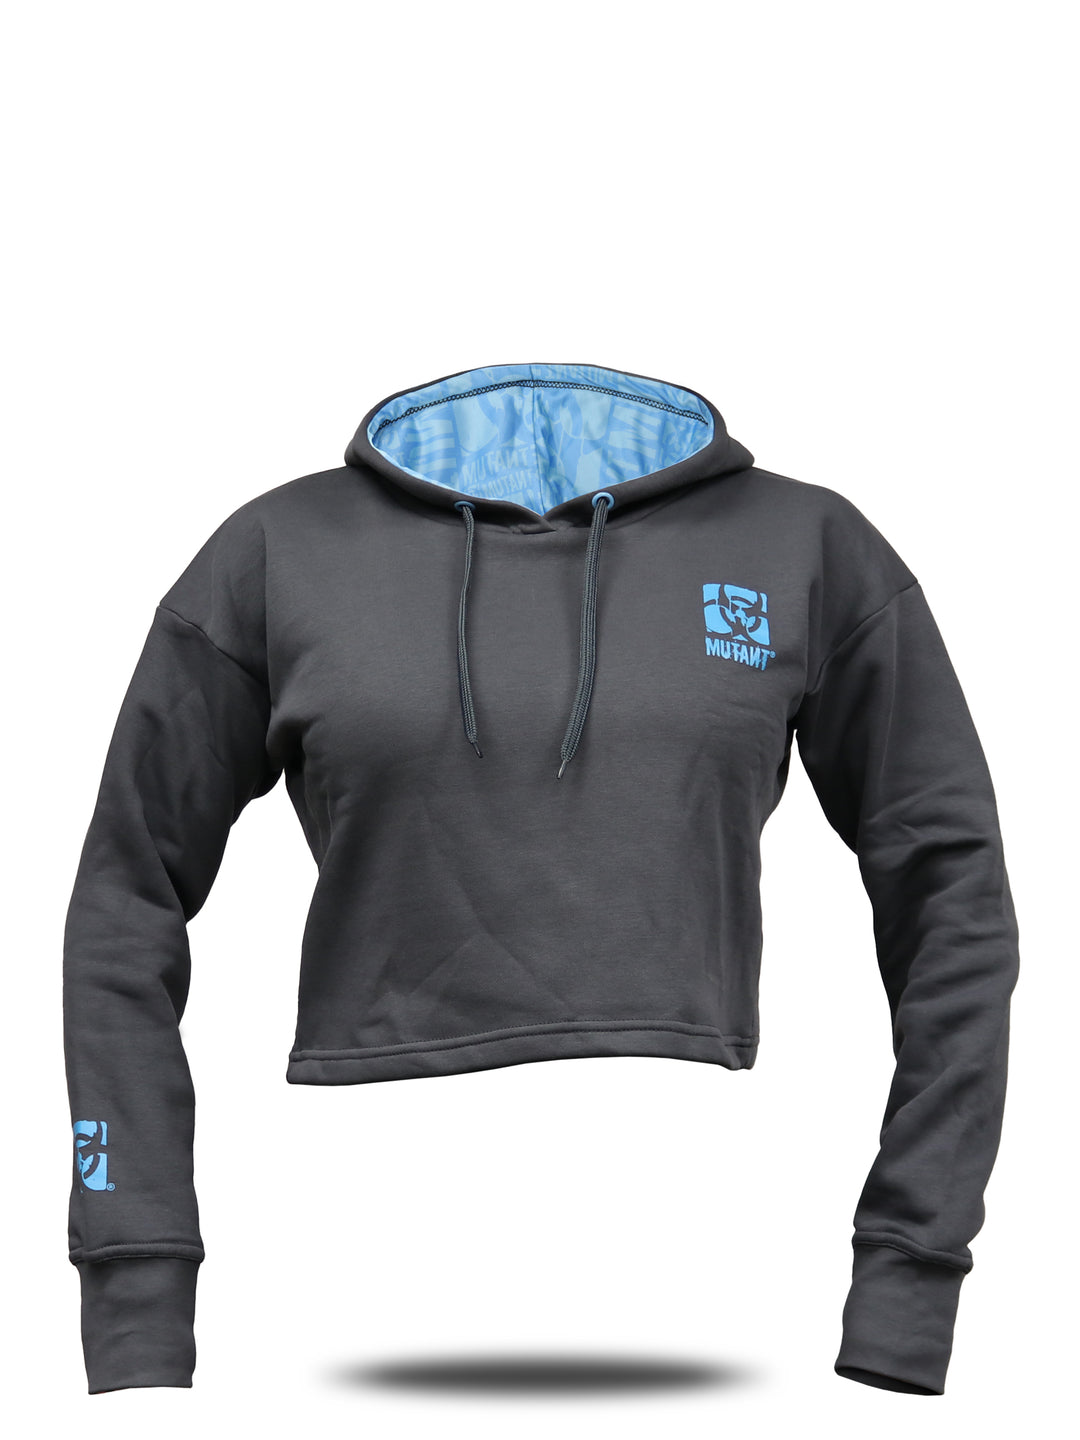 Livid Grey Mutant Thick Script Women's Gym Crop Hoodie with a blue Mutant logo on chest and wrist, featuring blue internal hood lining with watermarked Mutant logo. White background.